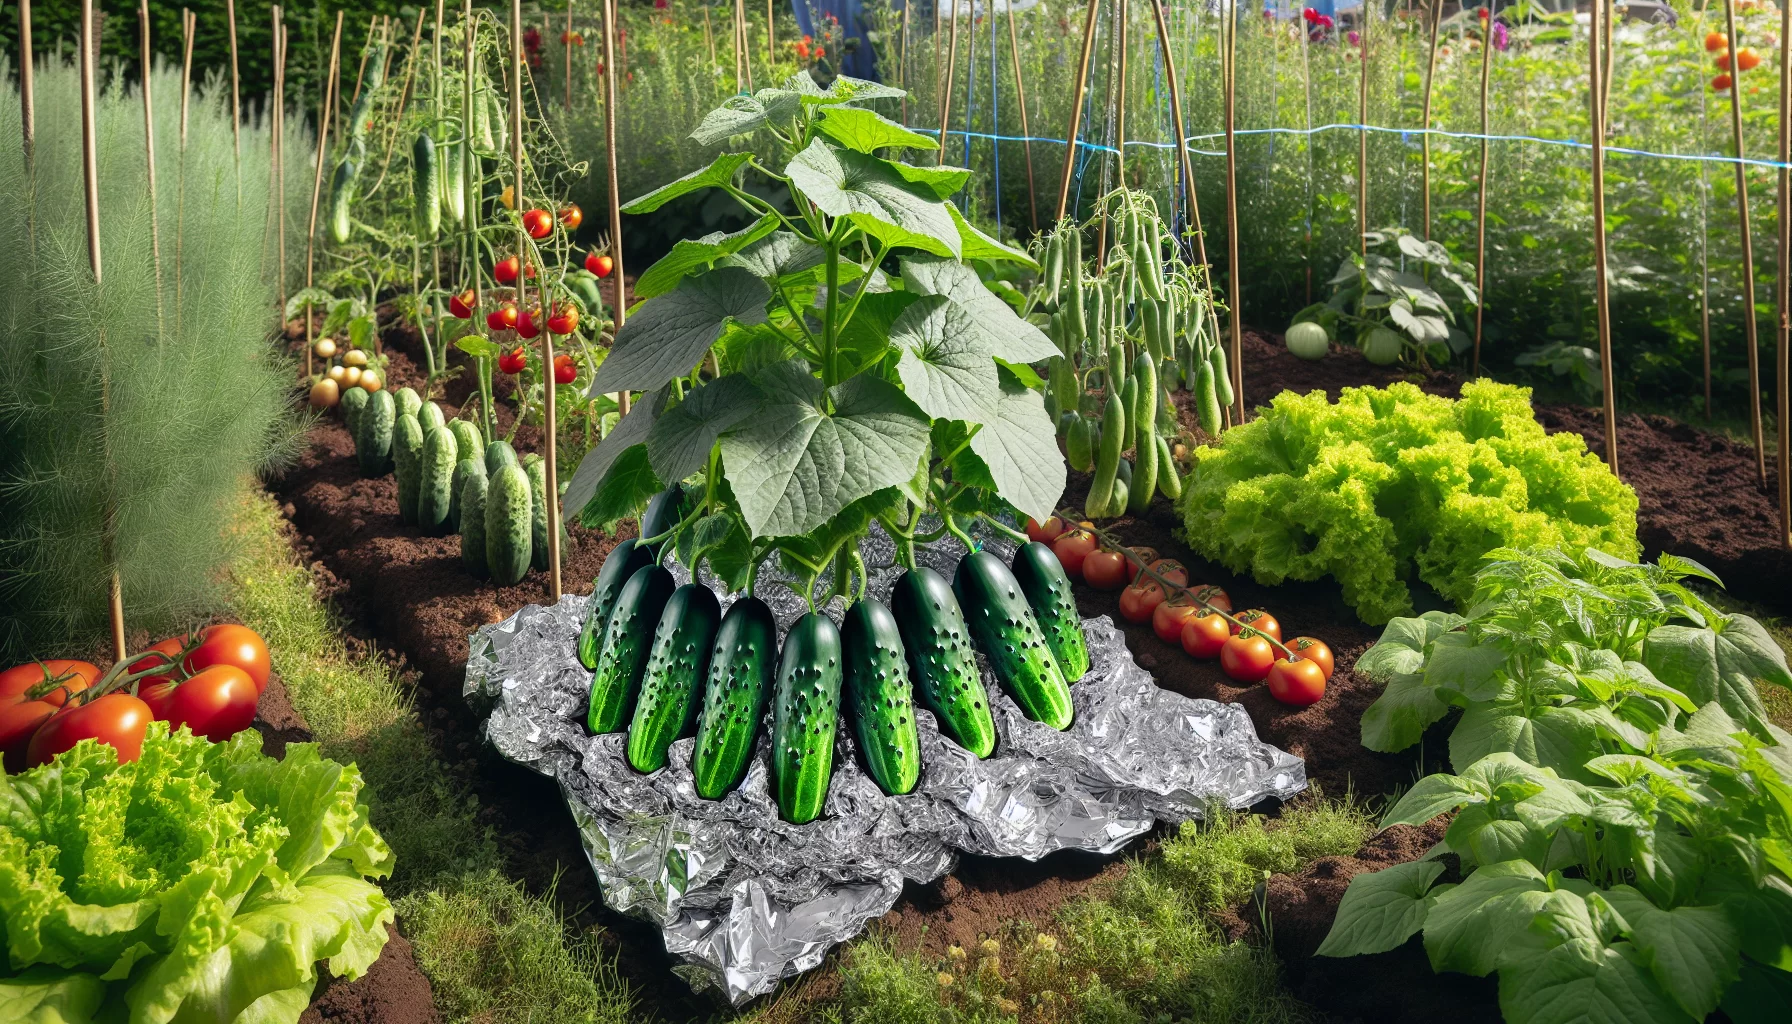 Unmasking the cucumber-aluminum foil trick: a sustainable and innovative garden hack